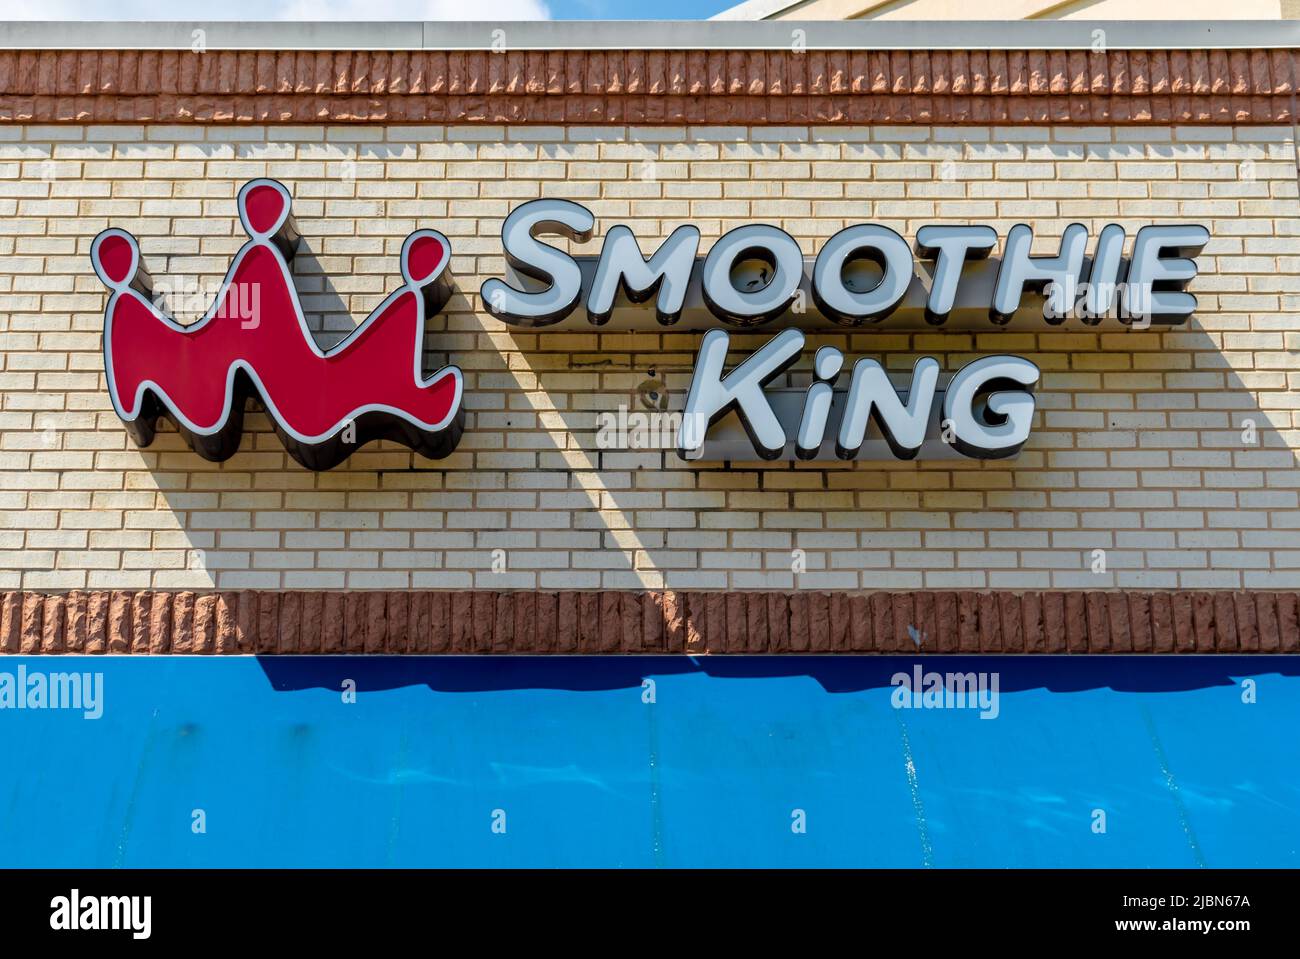 Smoothie King's exterior facade brand and logo signage in white three dimensional letters on beige brick above brilliant blue awning in sunshine. Stock Photo